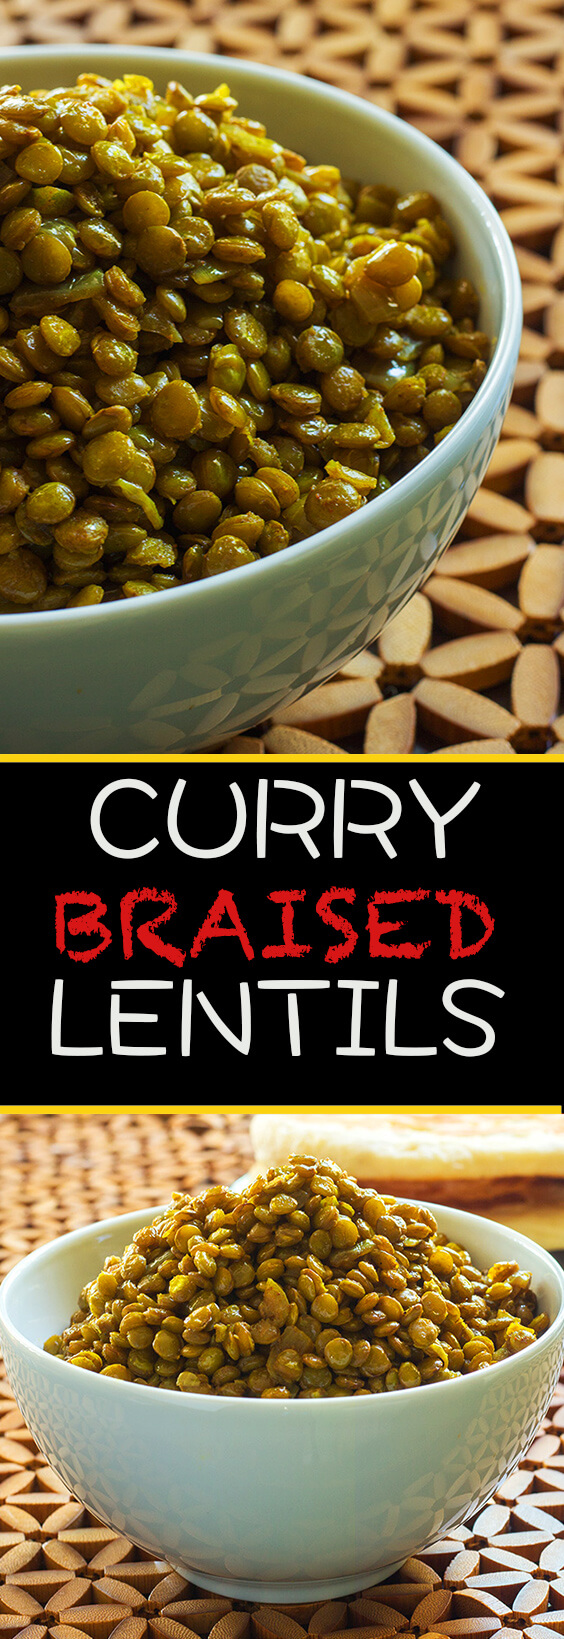 This curry braised lentils absorbs all the spices to make them creamy and tender. This is a great side dish or a quick dinner option. Add it to a salad, make a burrito with them or have them with some steaming hot rice.